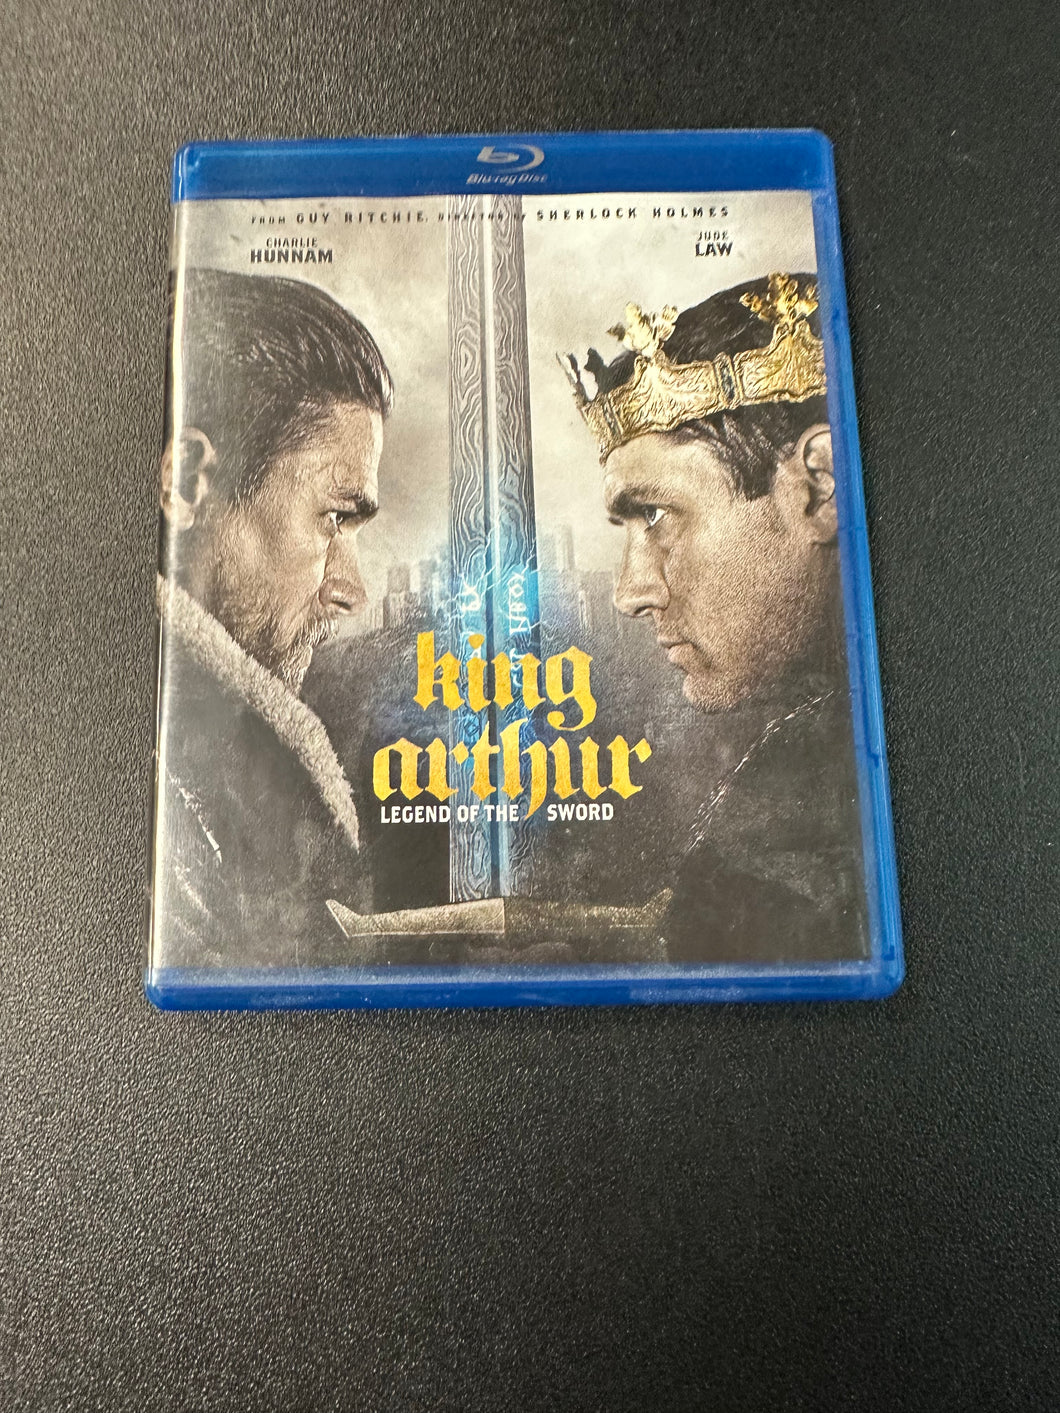 KING ARTHUR LEGEND OF THE SWORD [BluRay + DVD] PREOWNED